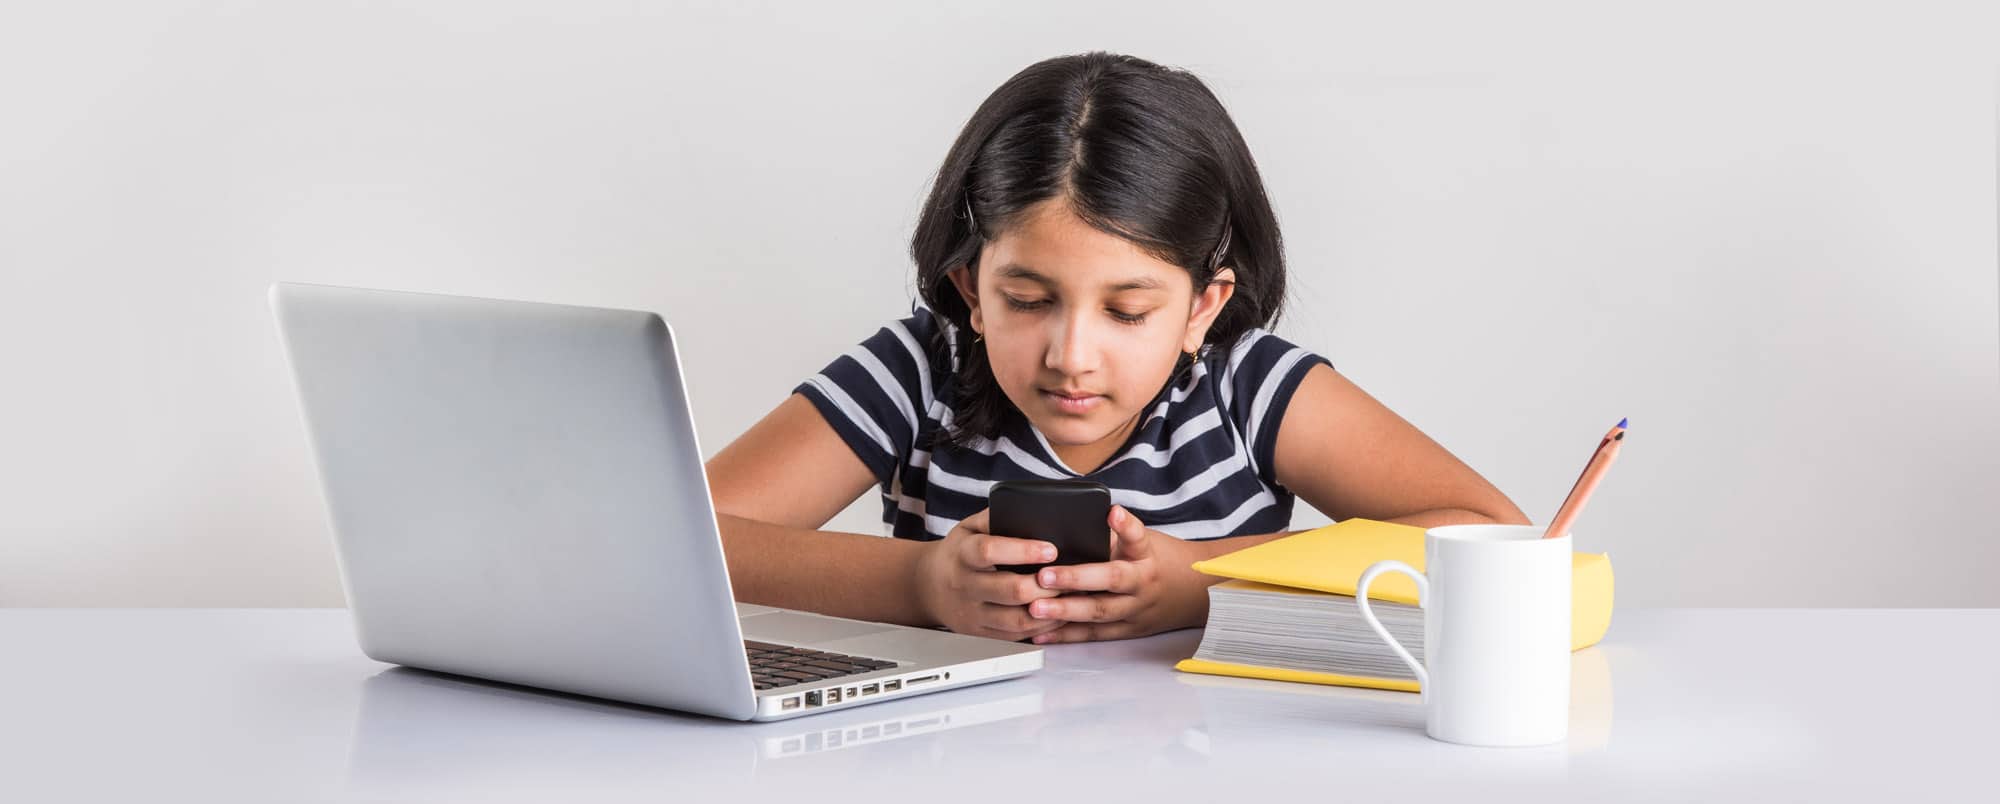 iphone message - The 4 Best Ways To Teach Your Kids About Technology